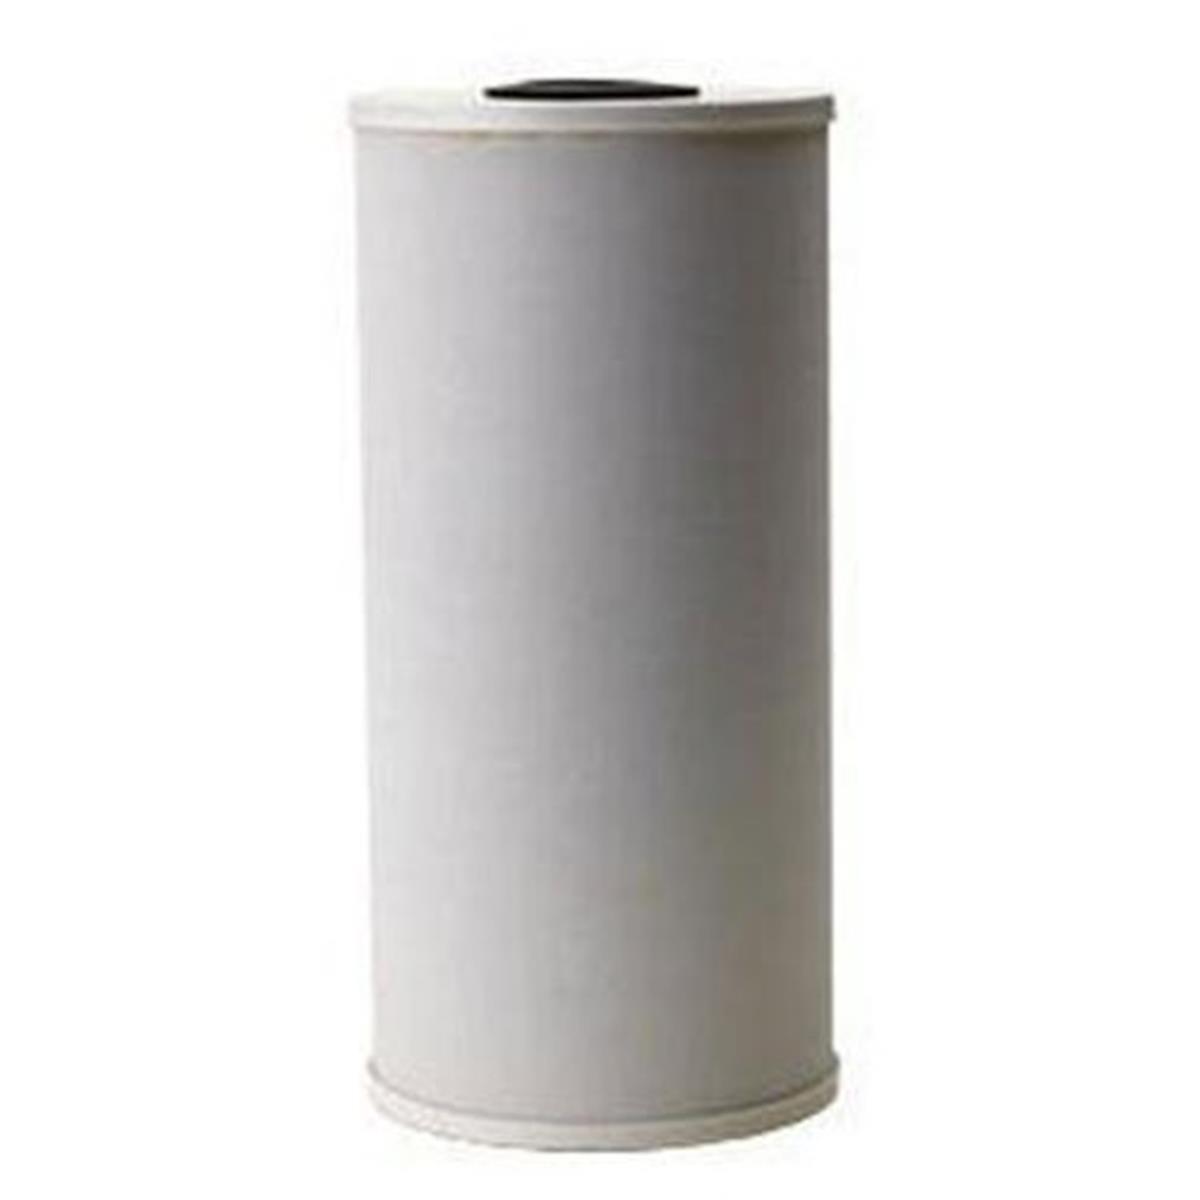 Picture of Omnifilter OMNIFILTER-TO8 Whole House Replacement Water Filter Cartridge